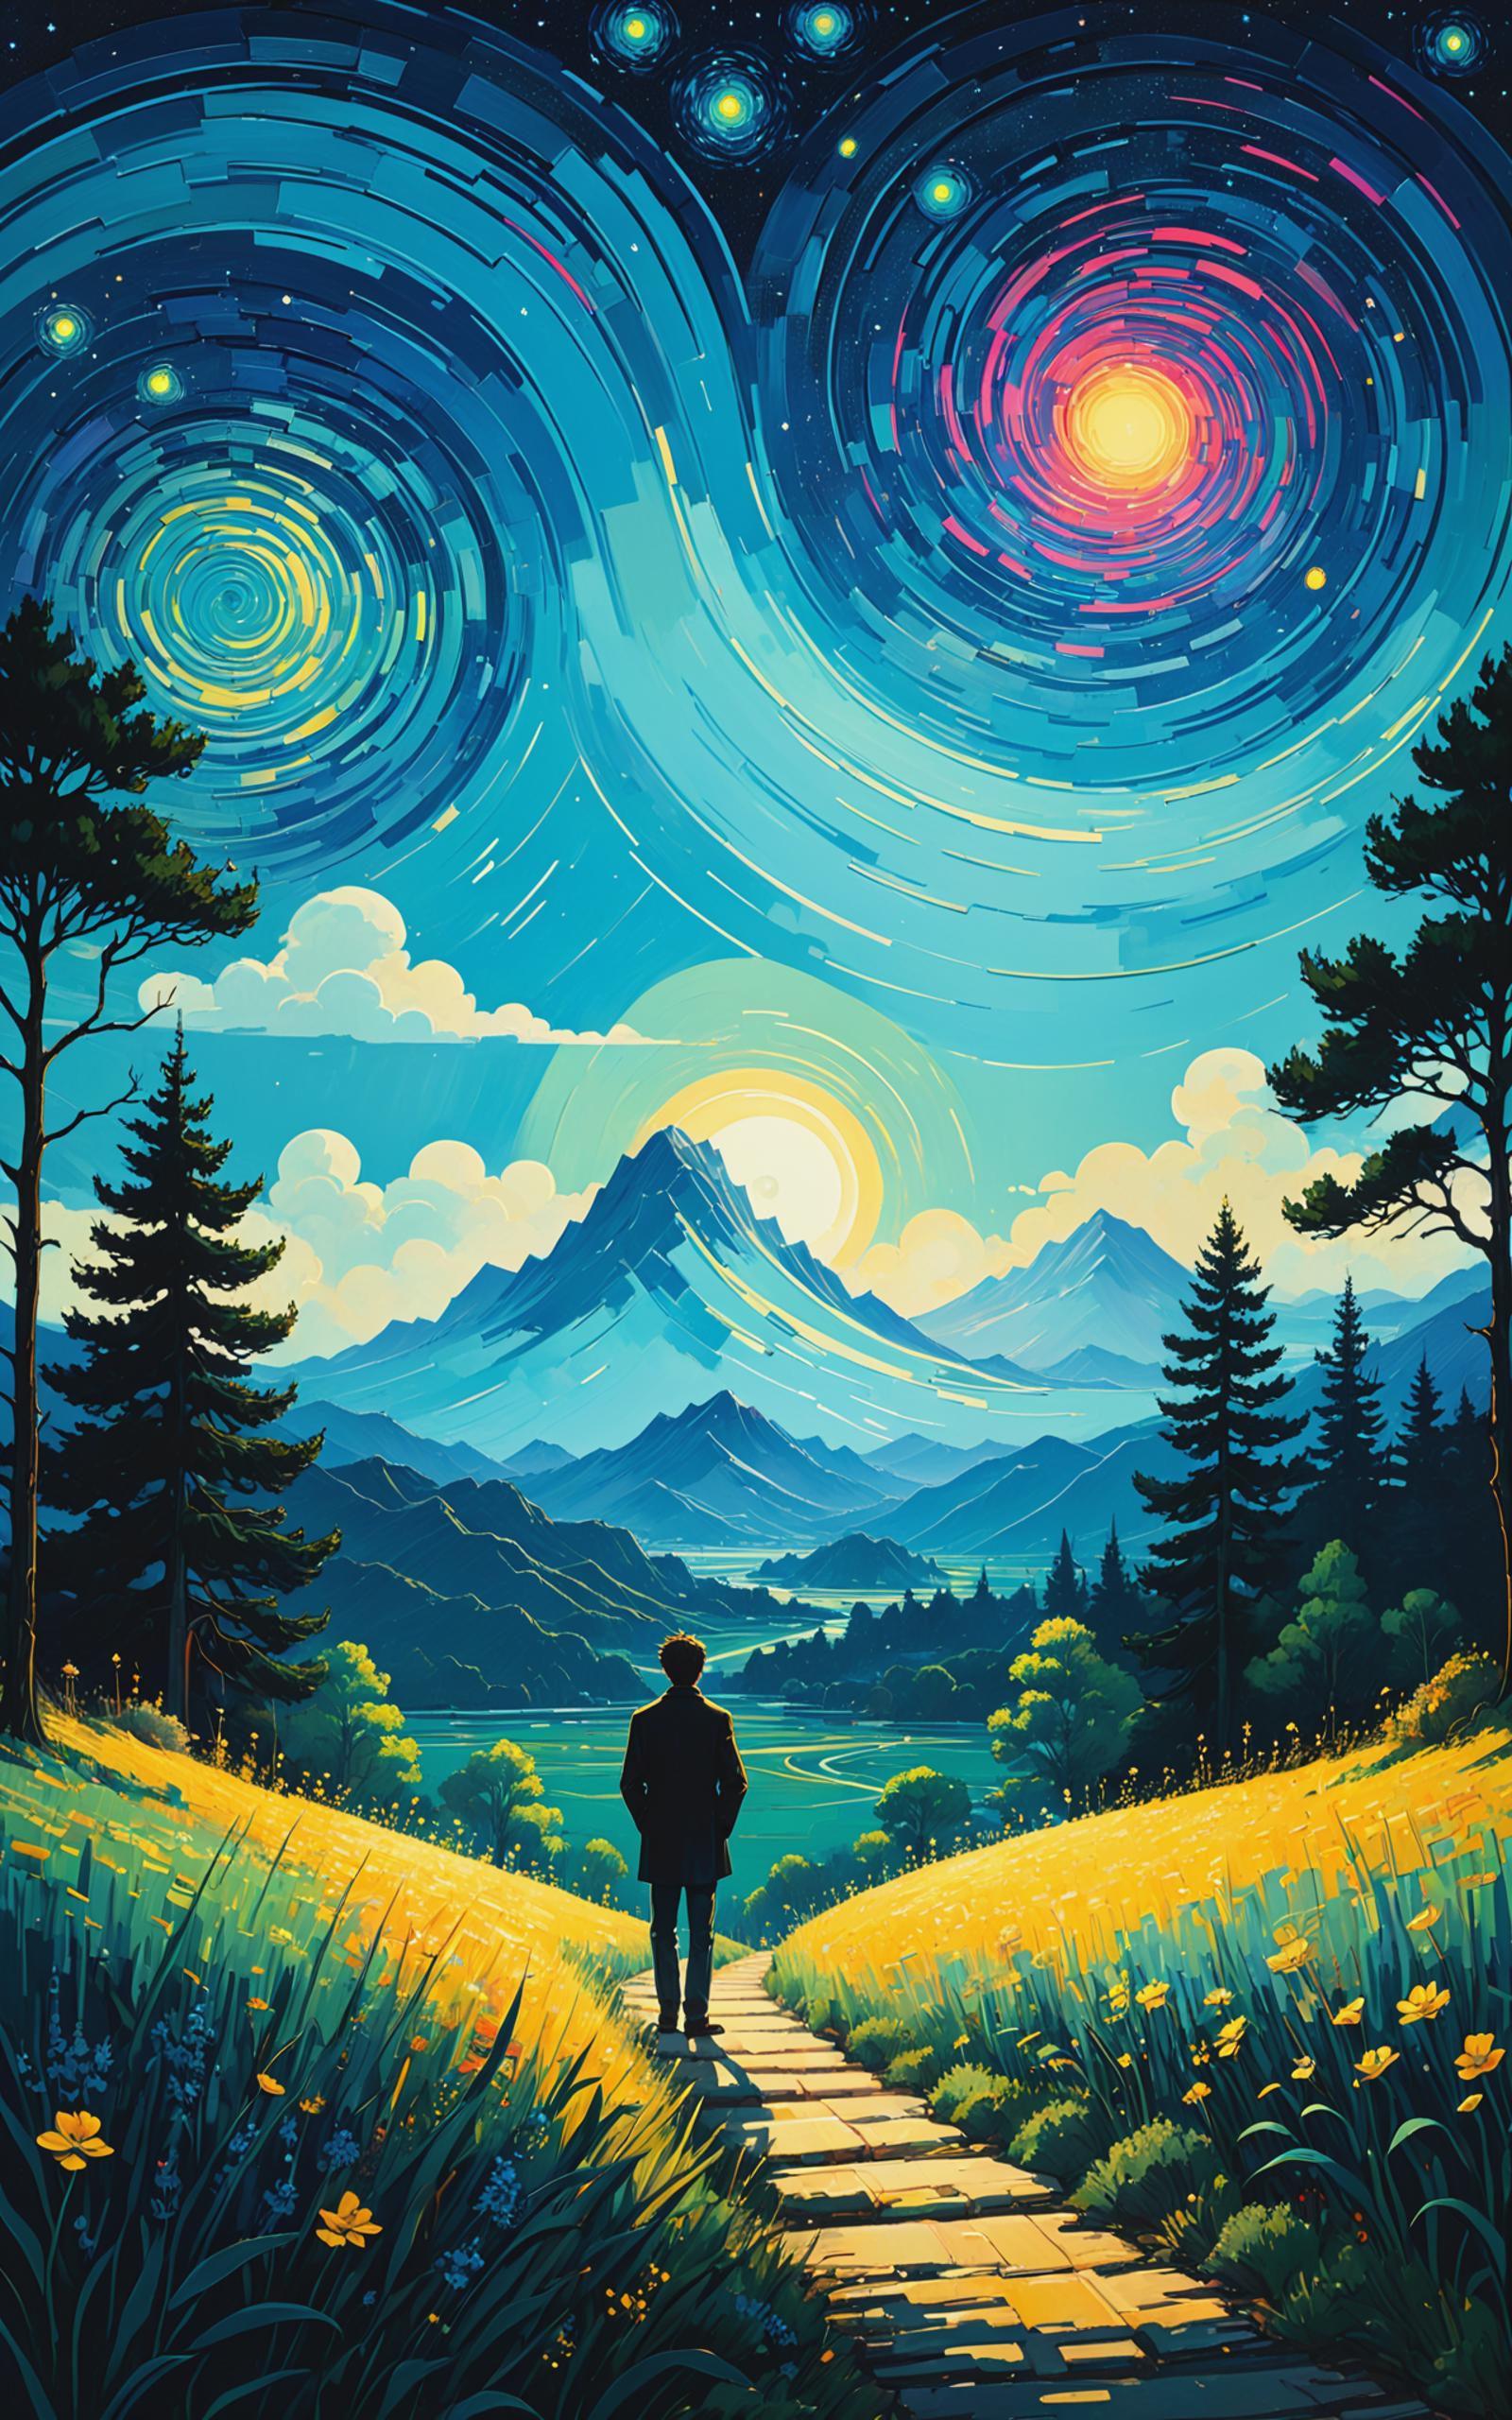 Man standing on a path at sunset with mountains and stars in the background.